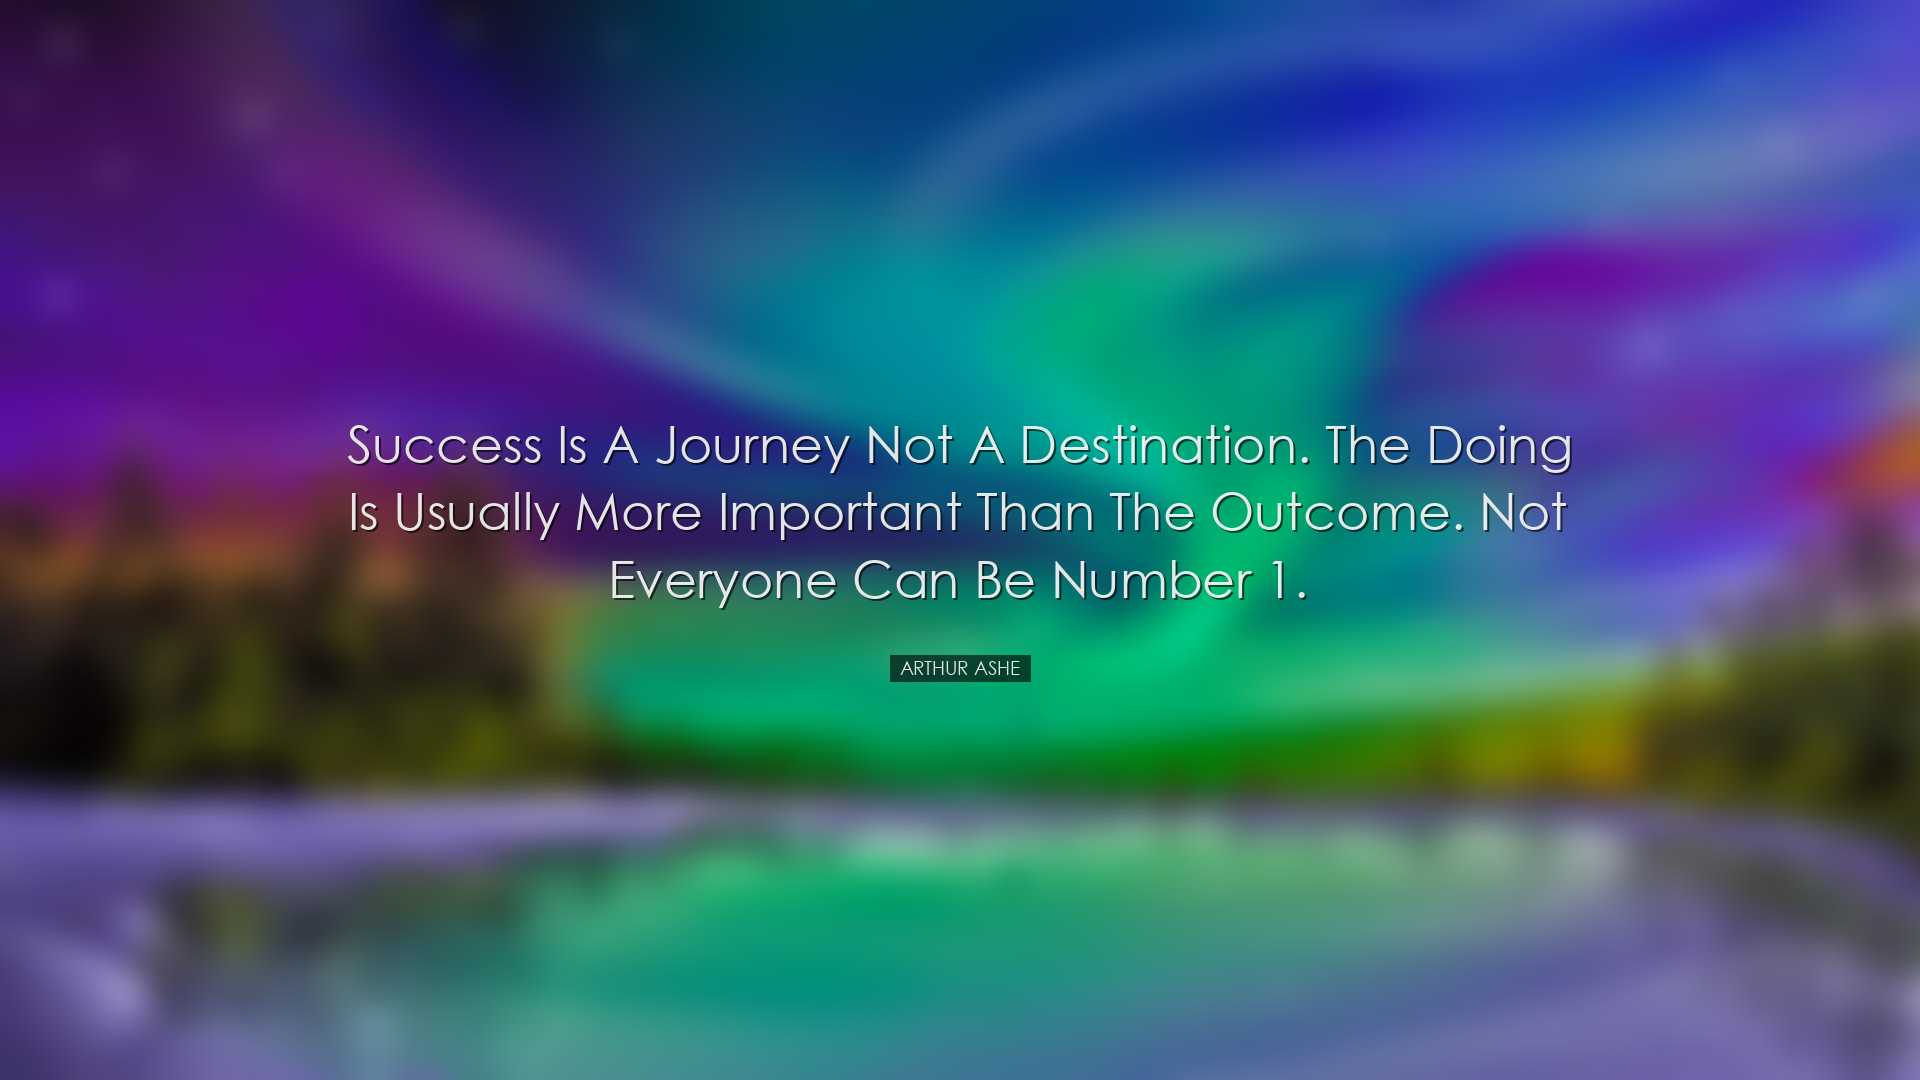 Success is a journey not a destination. The doing is usually more